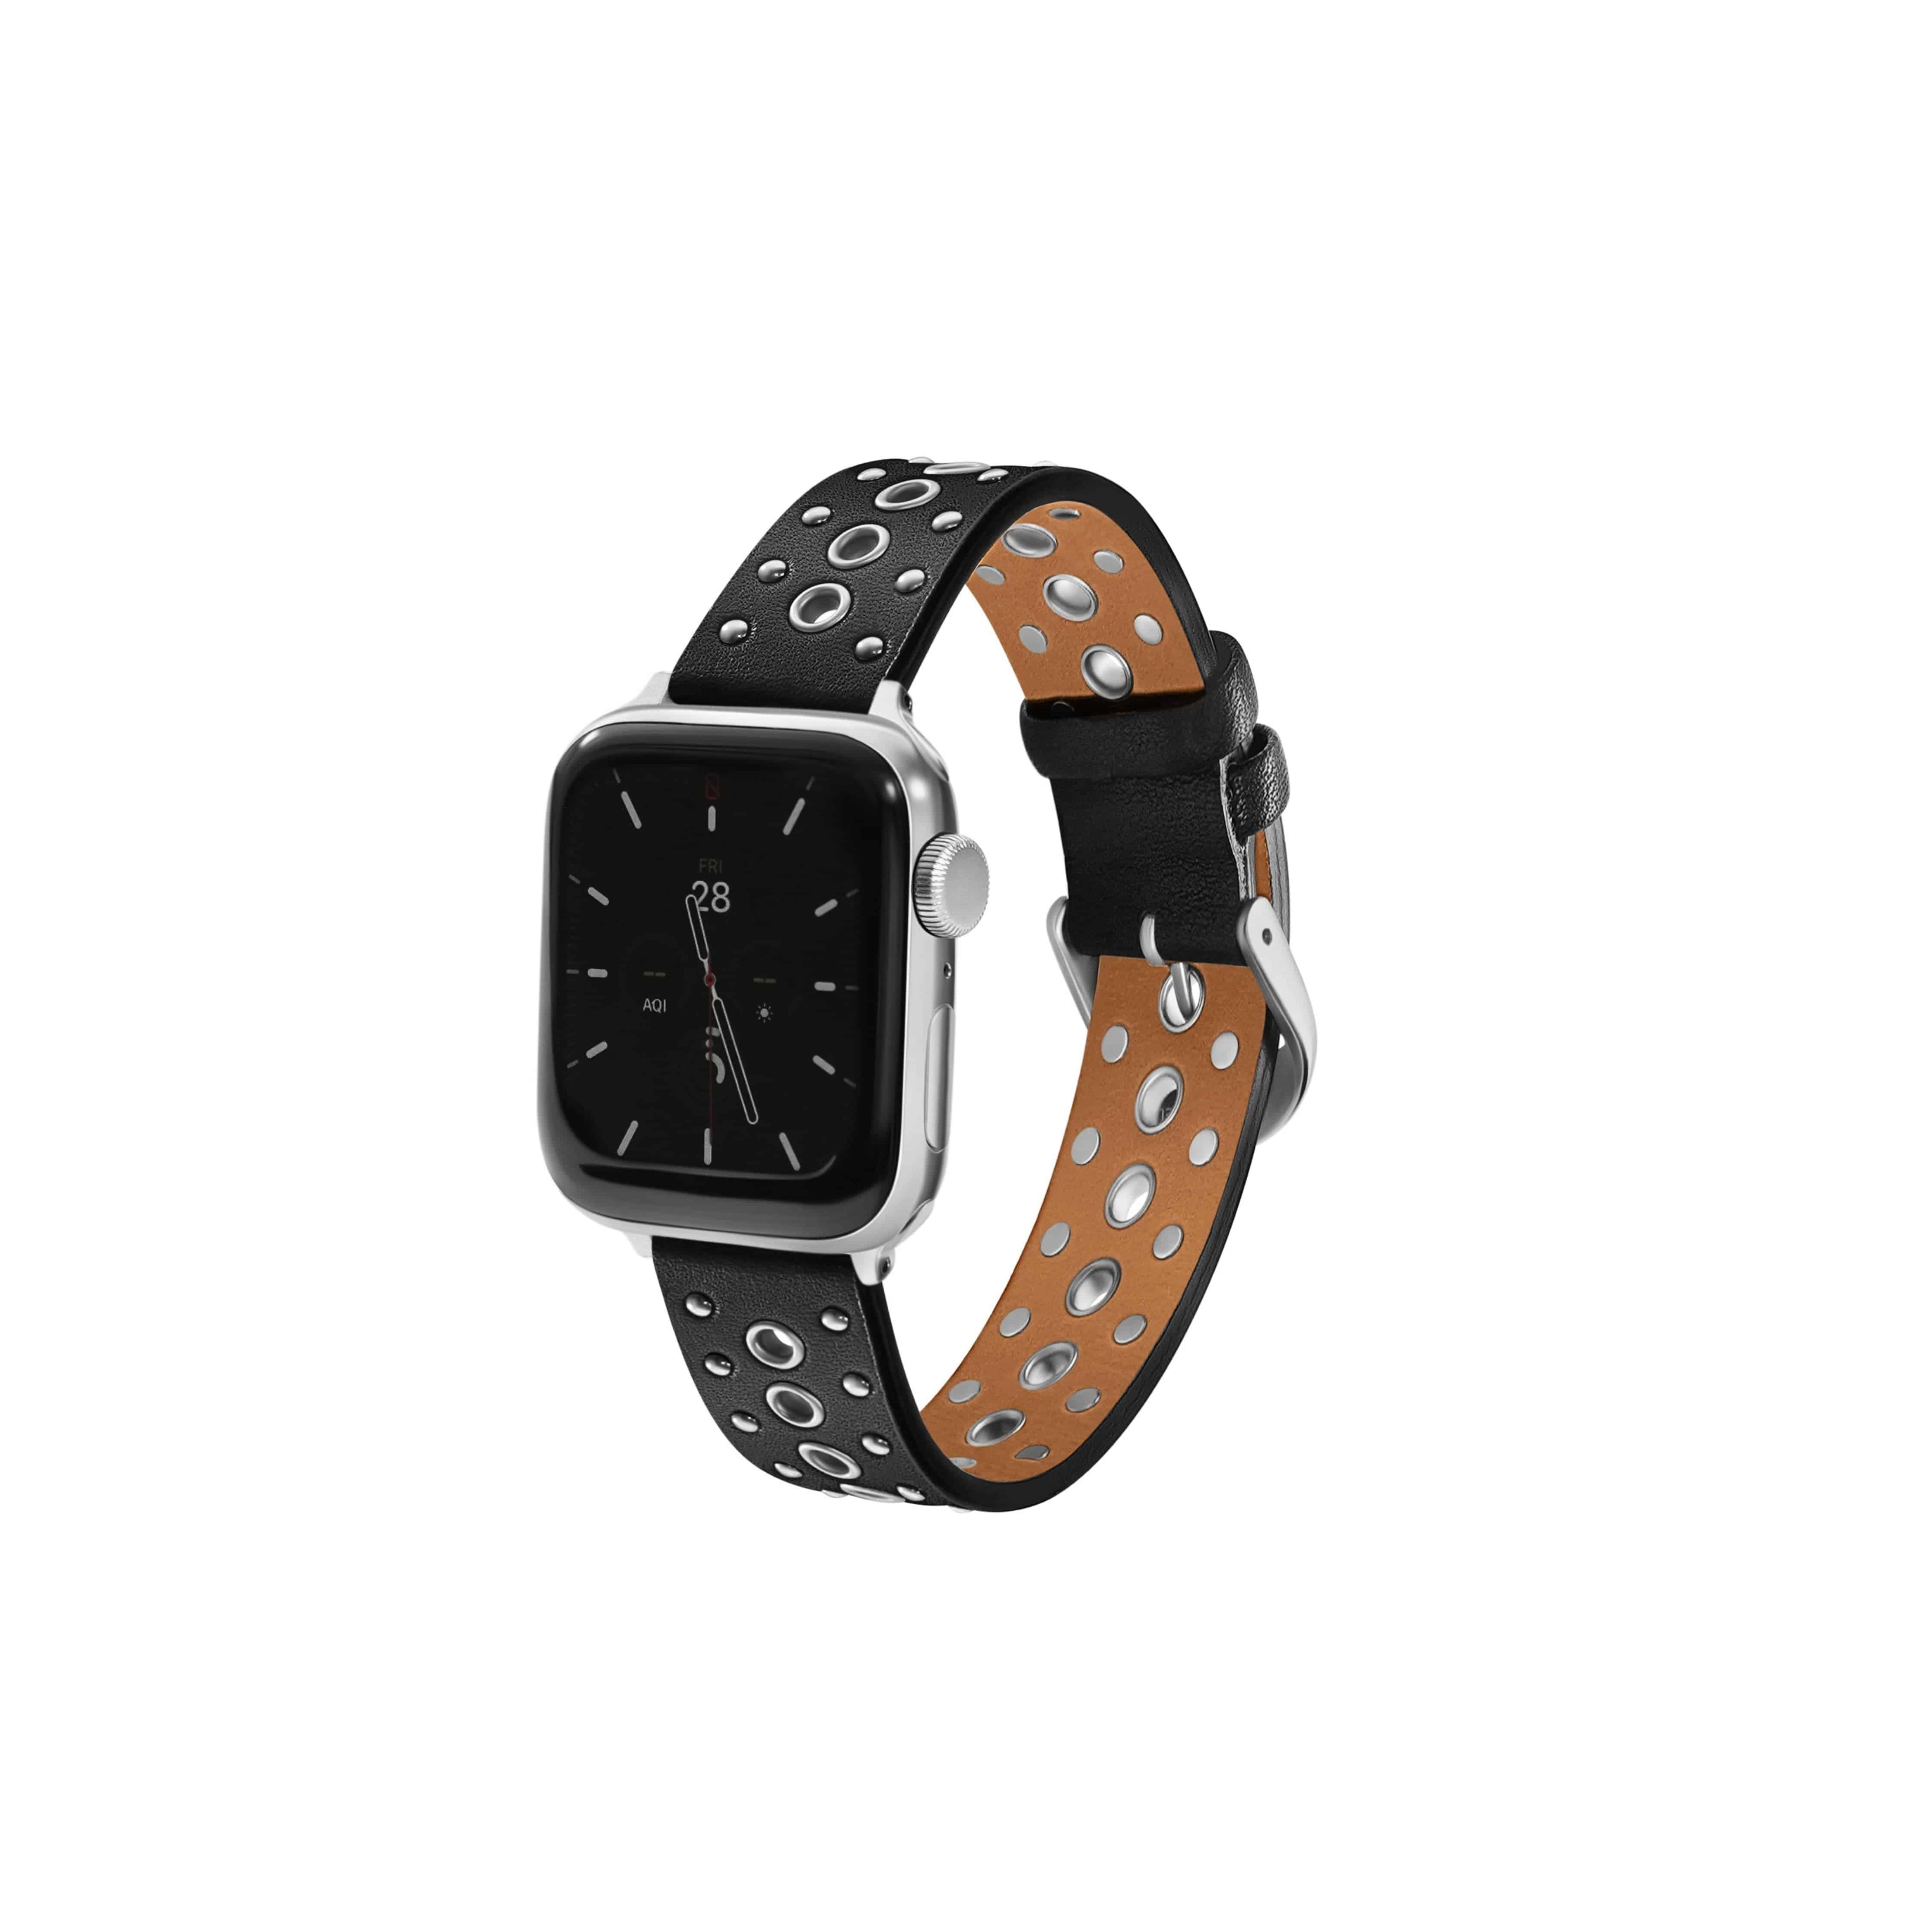 Grommet Stud Band for the Apple Watch - Goldenerre Women's Apple Watch Bands and Jewelry